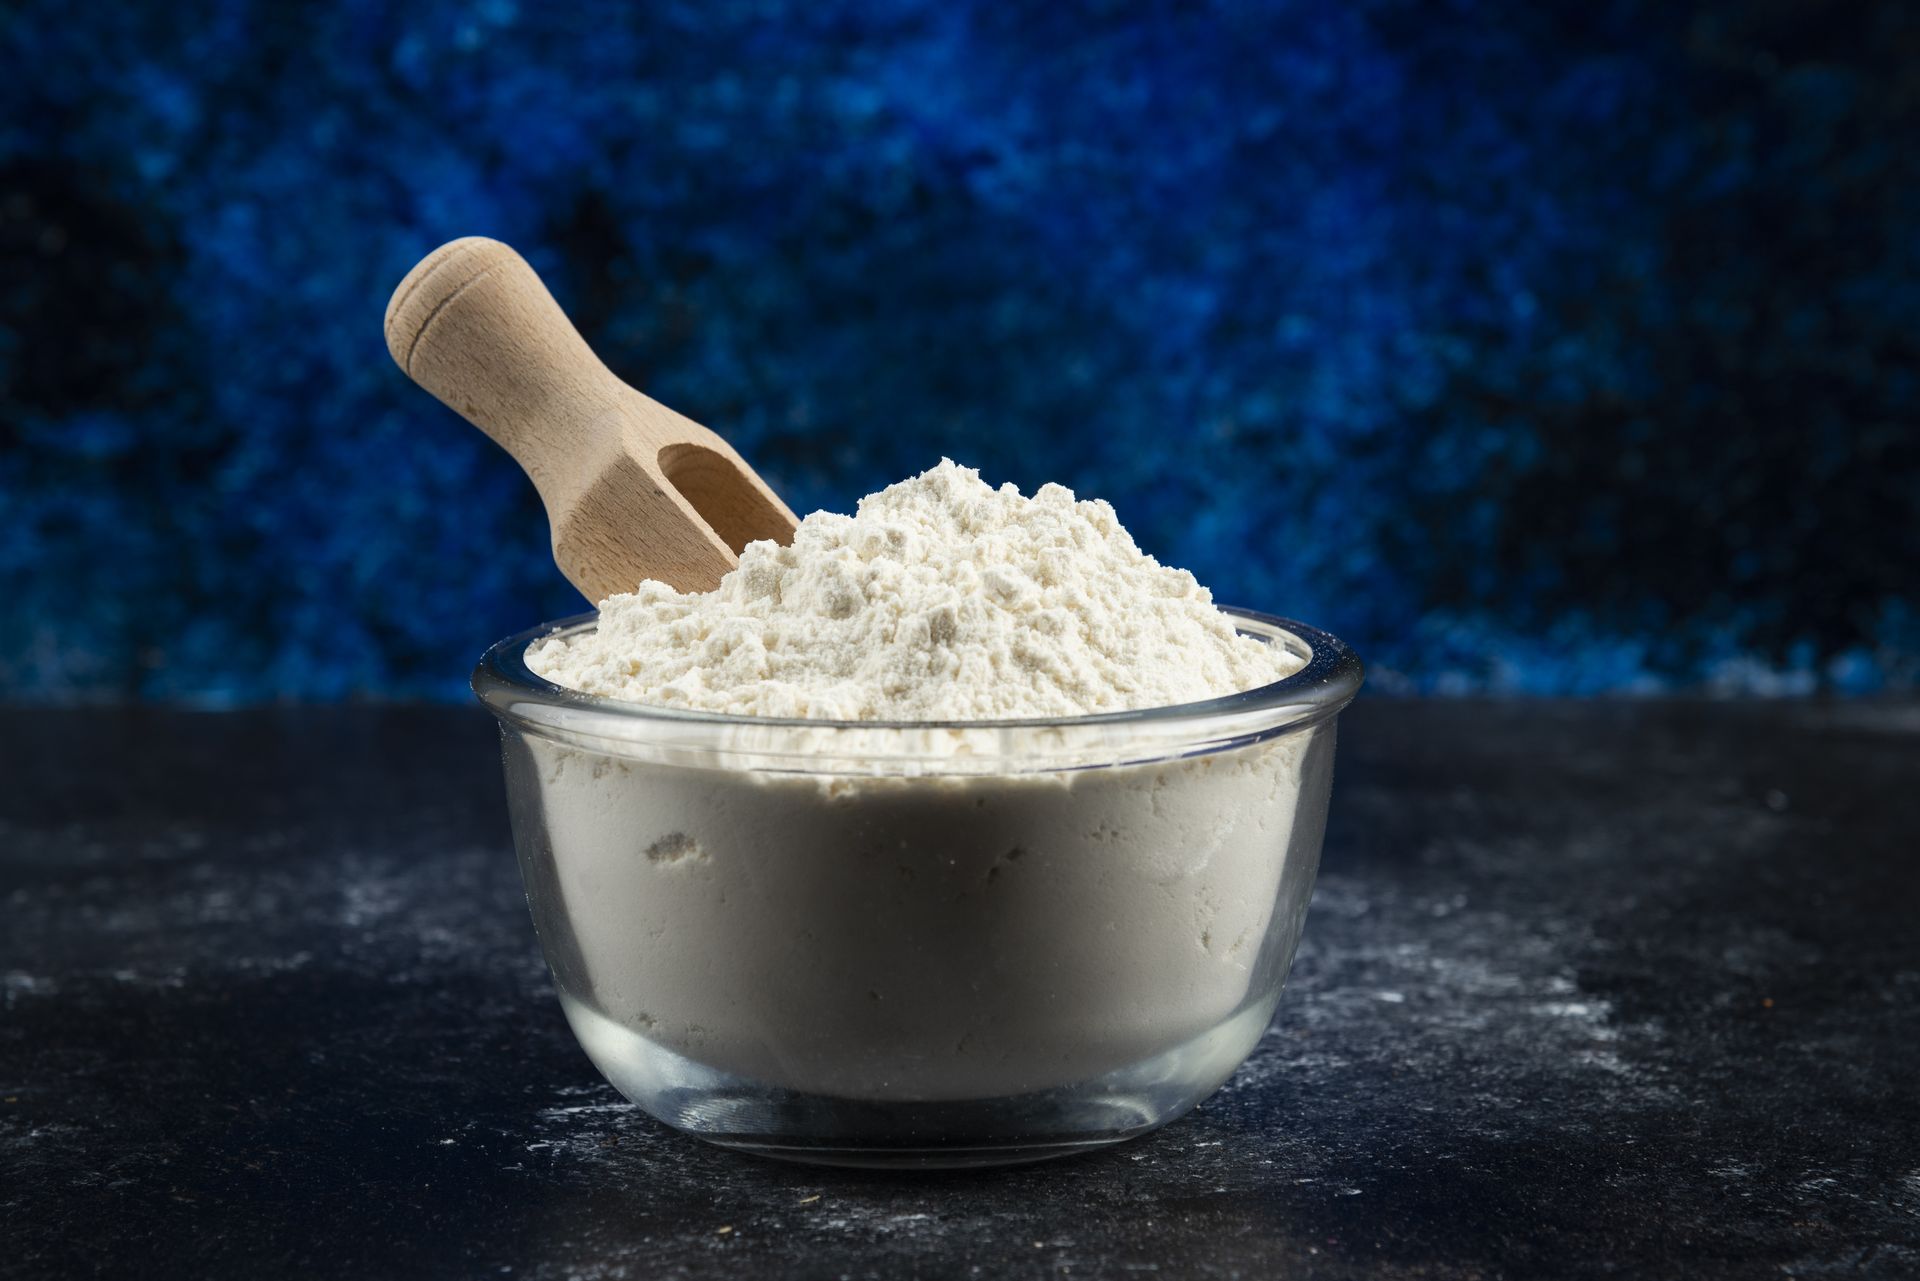 A bowl of flour with yeast and scooper in a blue background